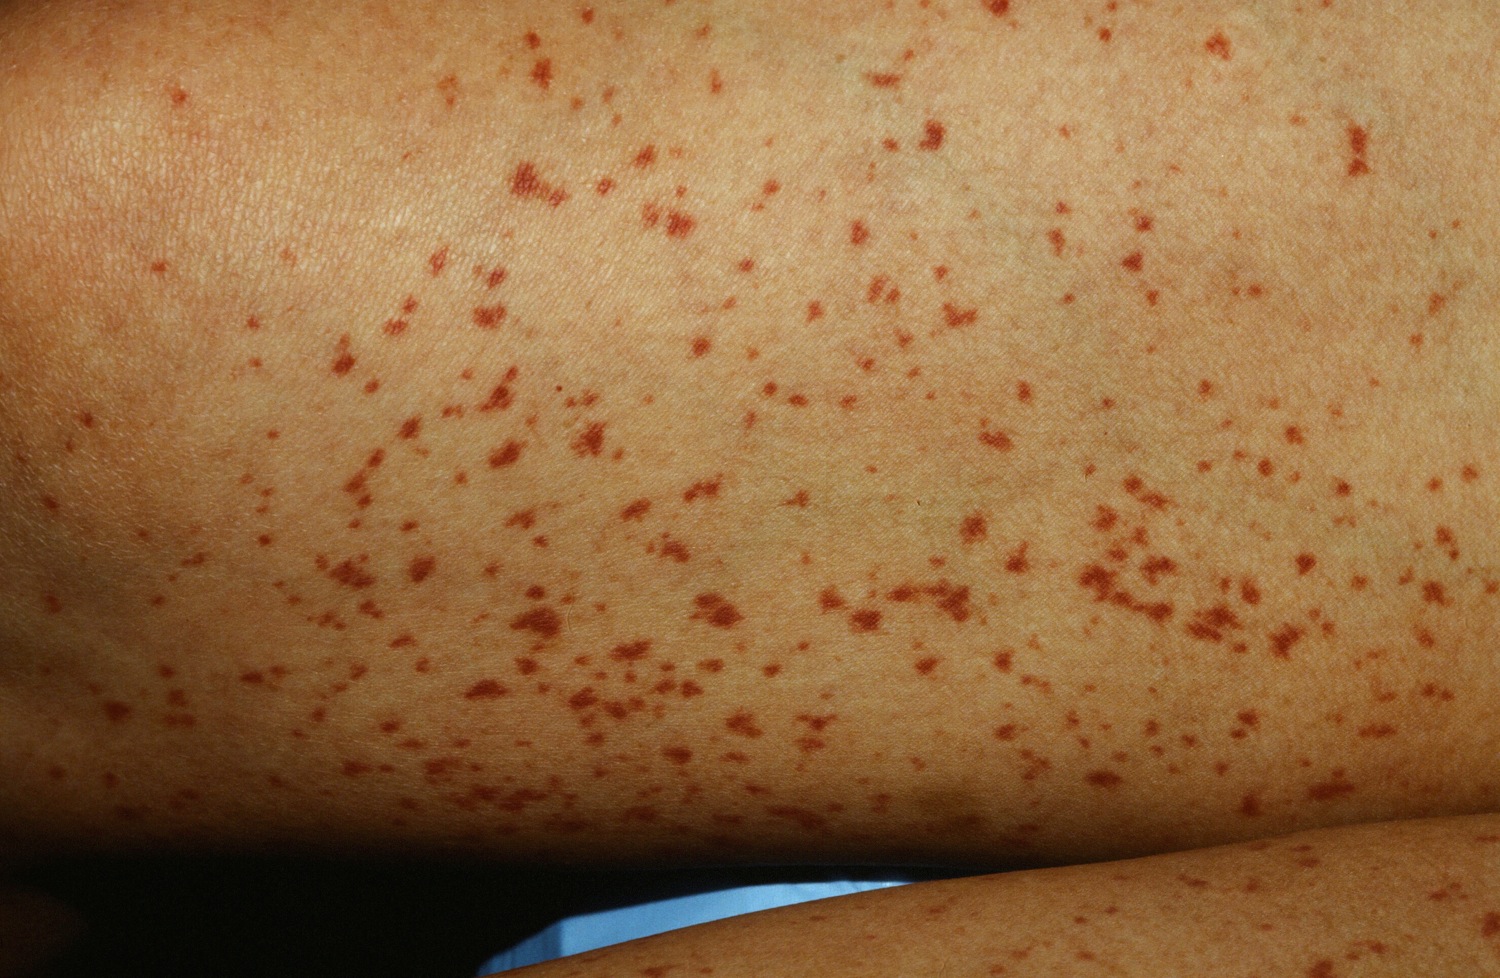 random pinpoint red dots on skin